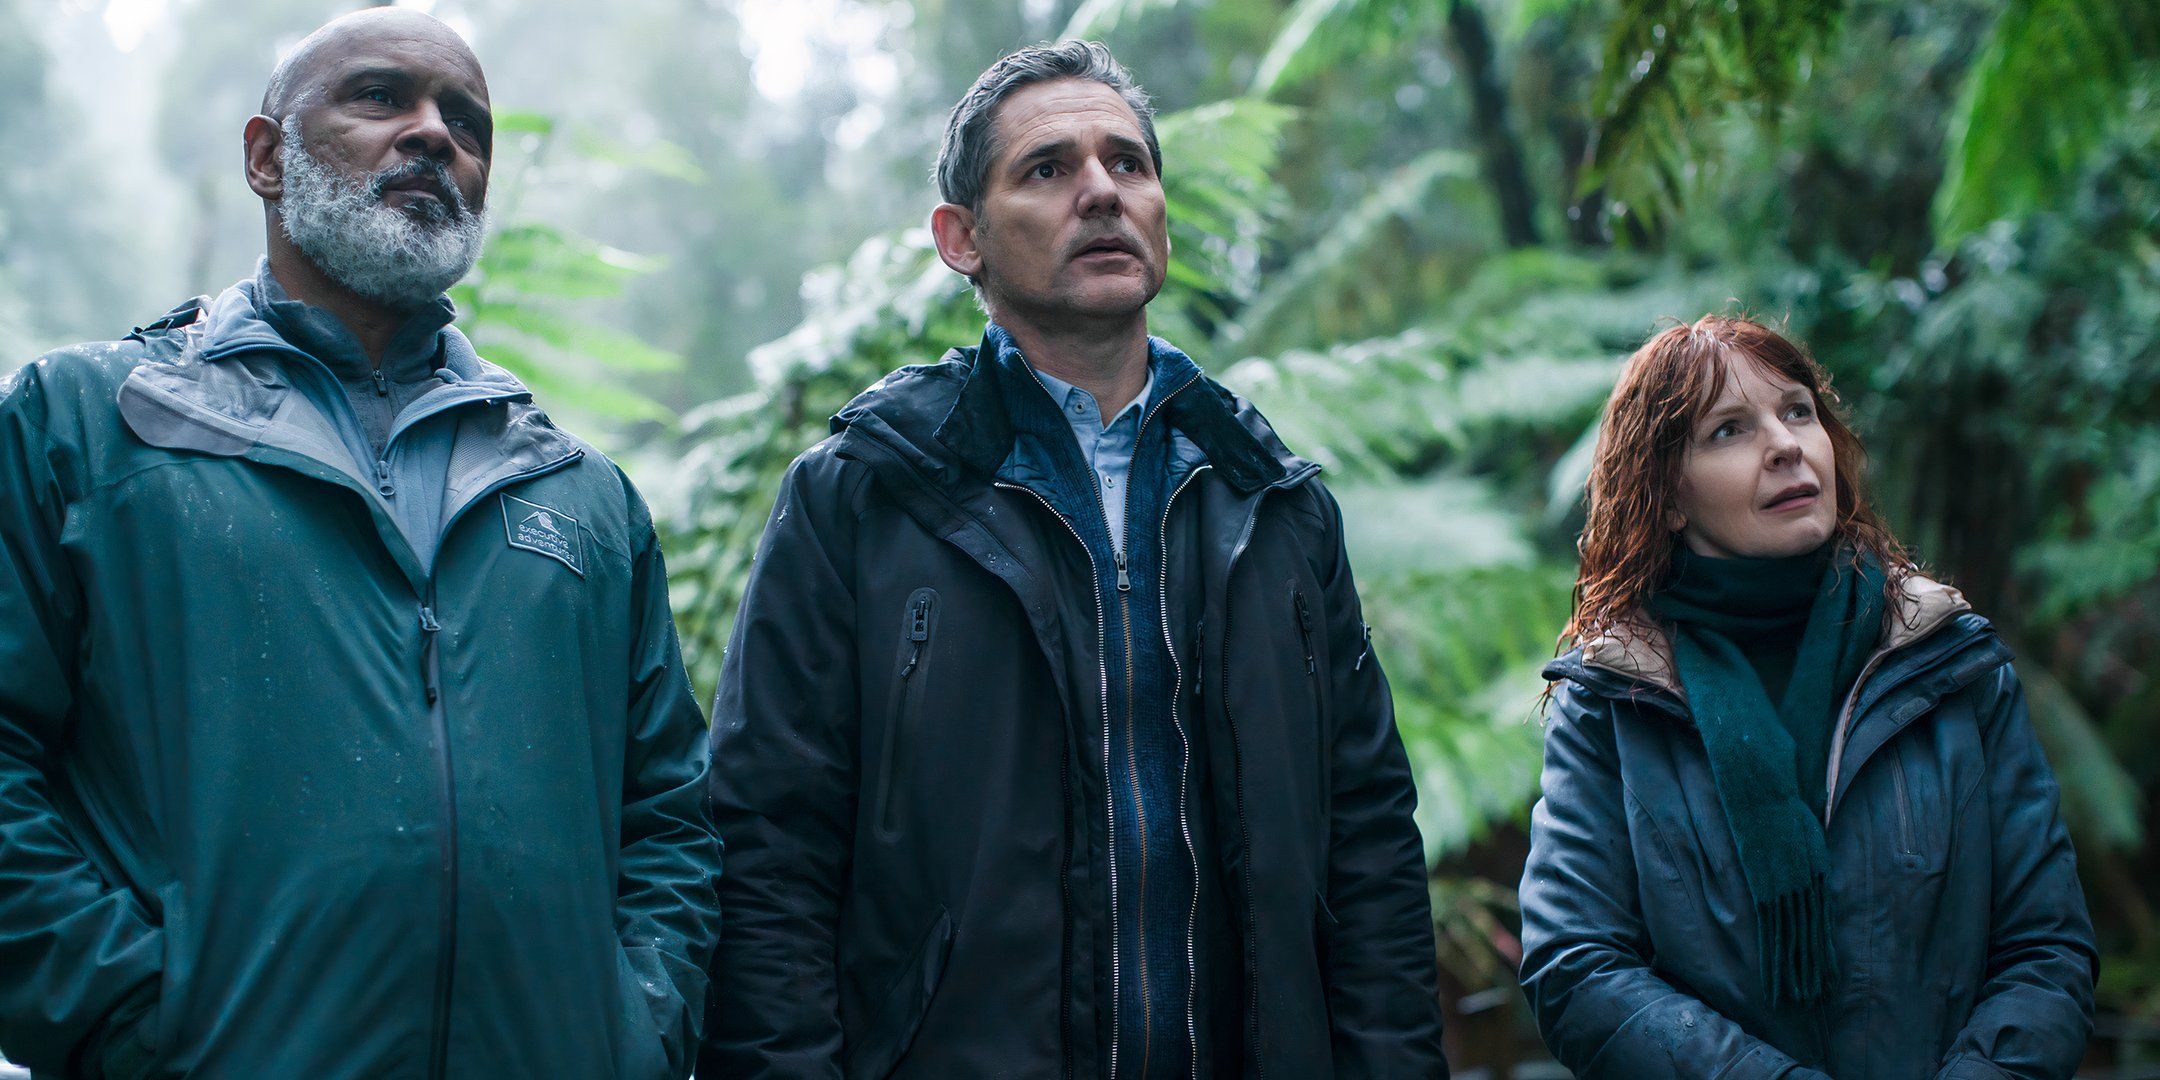 Tony Briggs, Eric Bana and Jacquleine McKenzie looking curious in the forest in Force of Nature The Dry 2